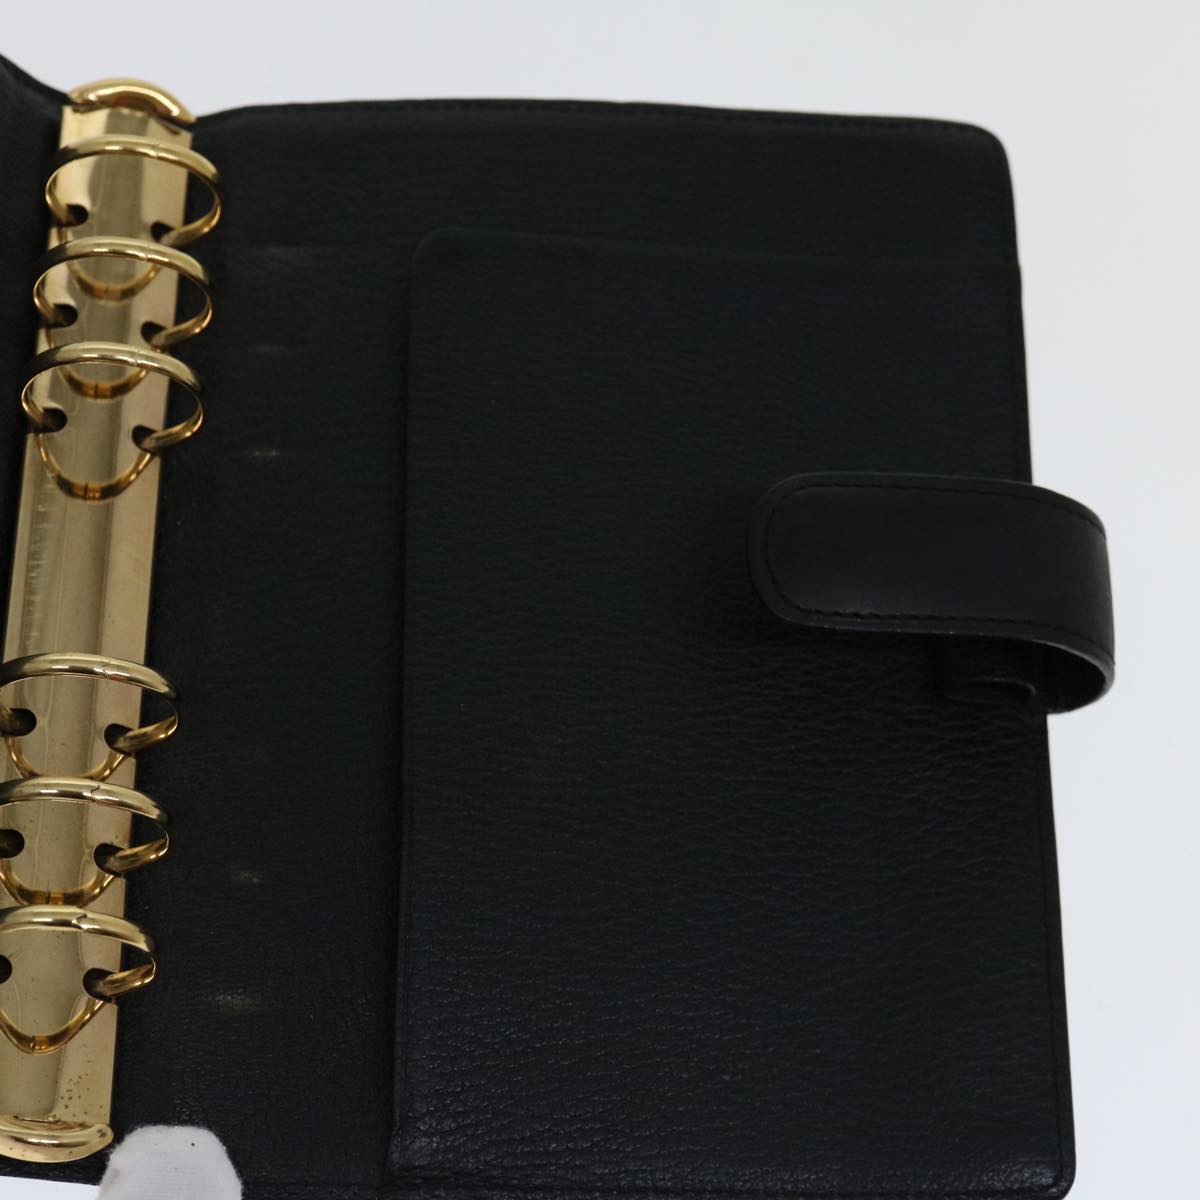 LOUIS VUITTON Nomad Agenda MM Day Planner Cover Black R20478 LV Auth bs13206